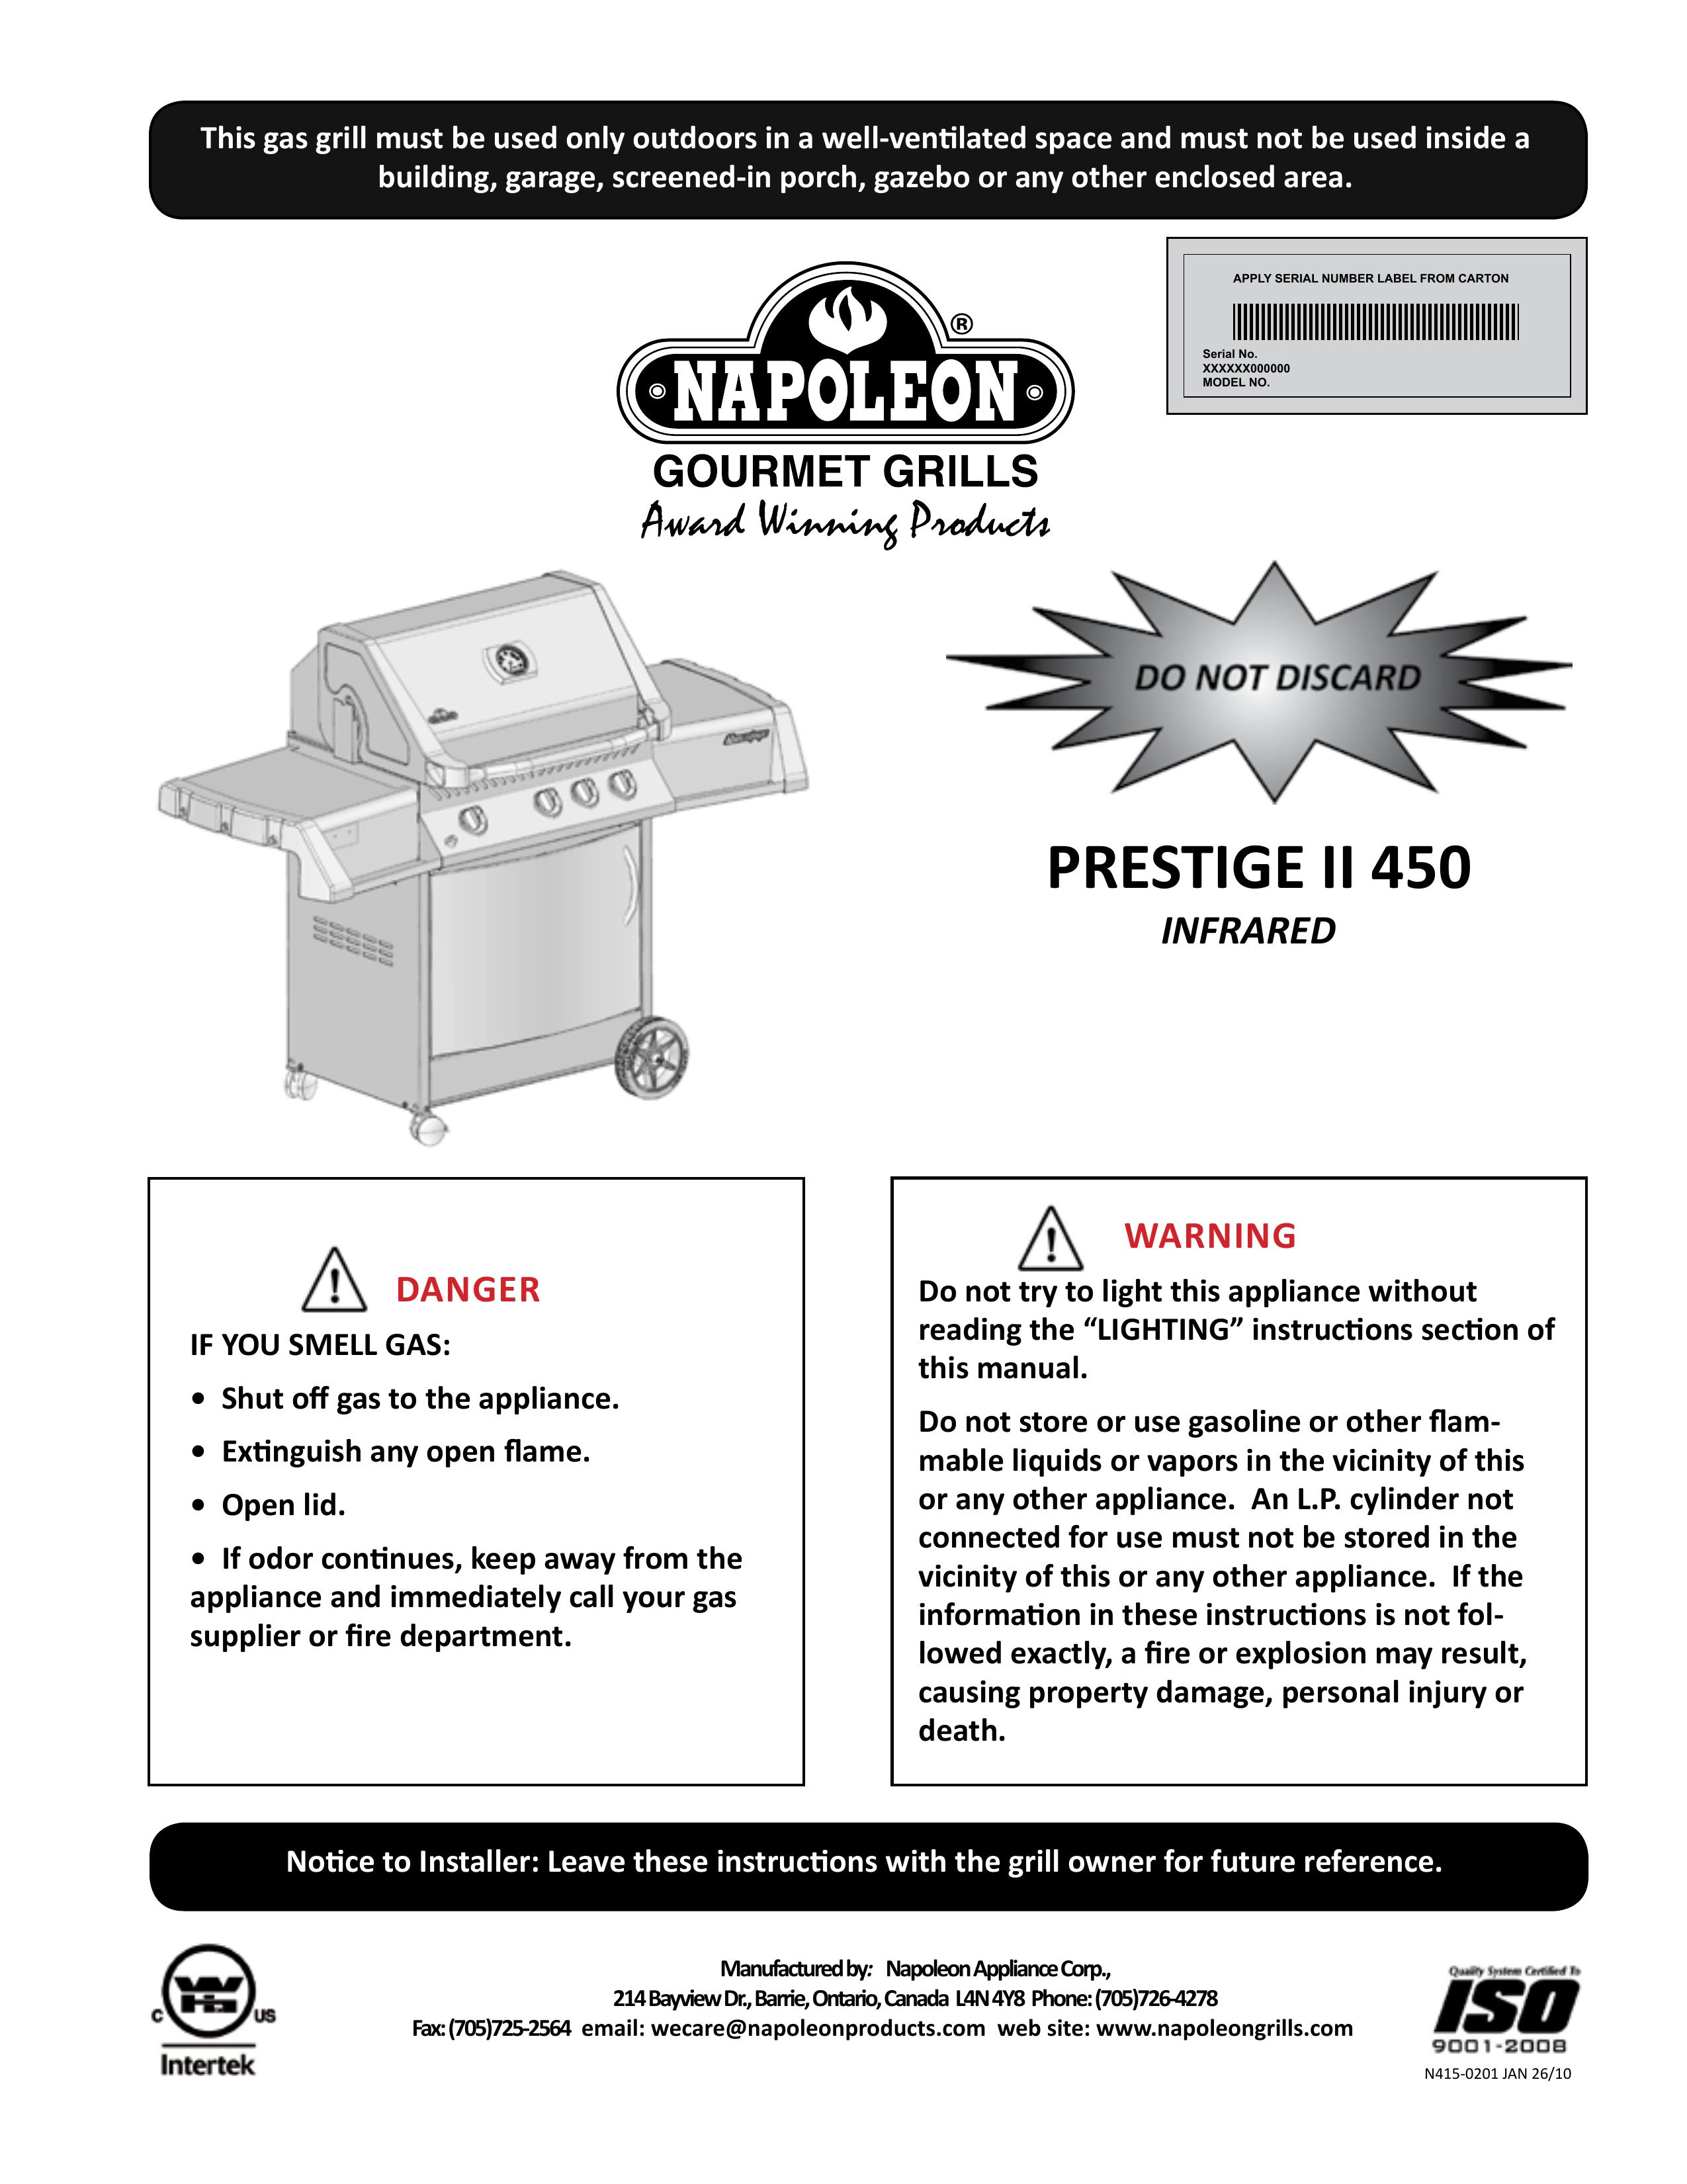 Napoleon Grills N415-0201 Gas Grill User Manual